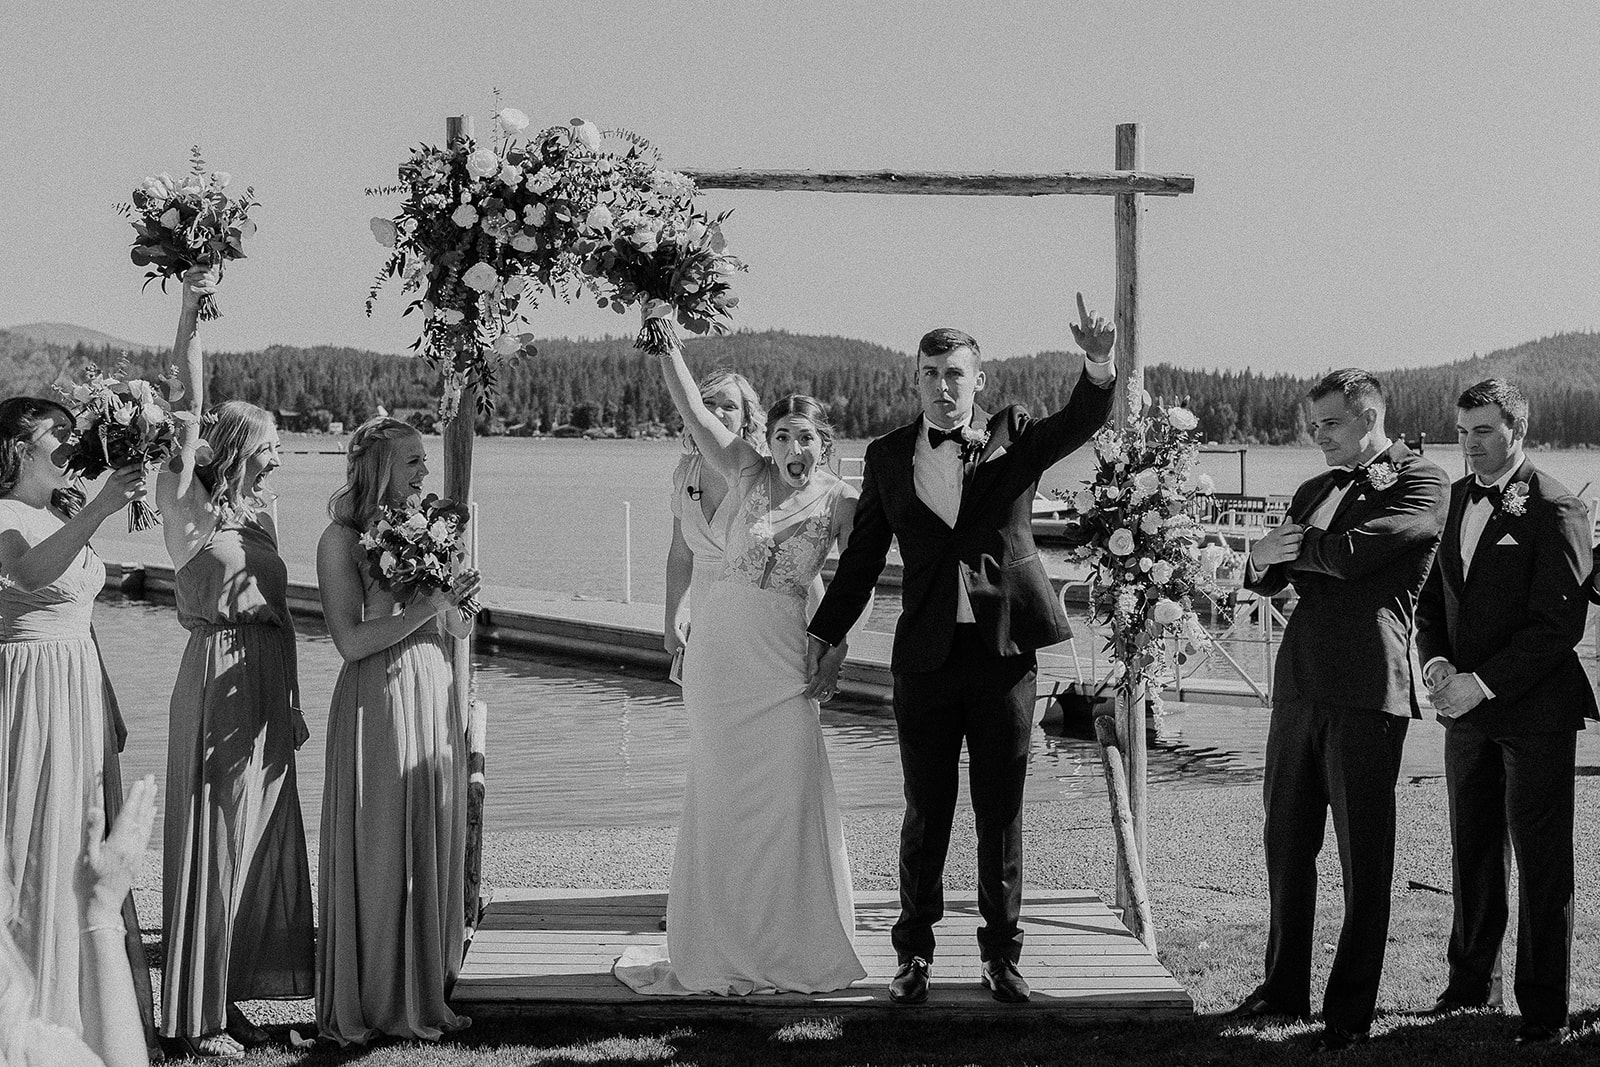 Bride and groom celebrate after first kiss as husband and wife at private lake house lake front wedding.